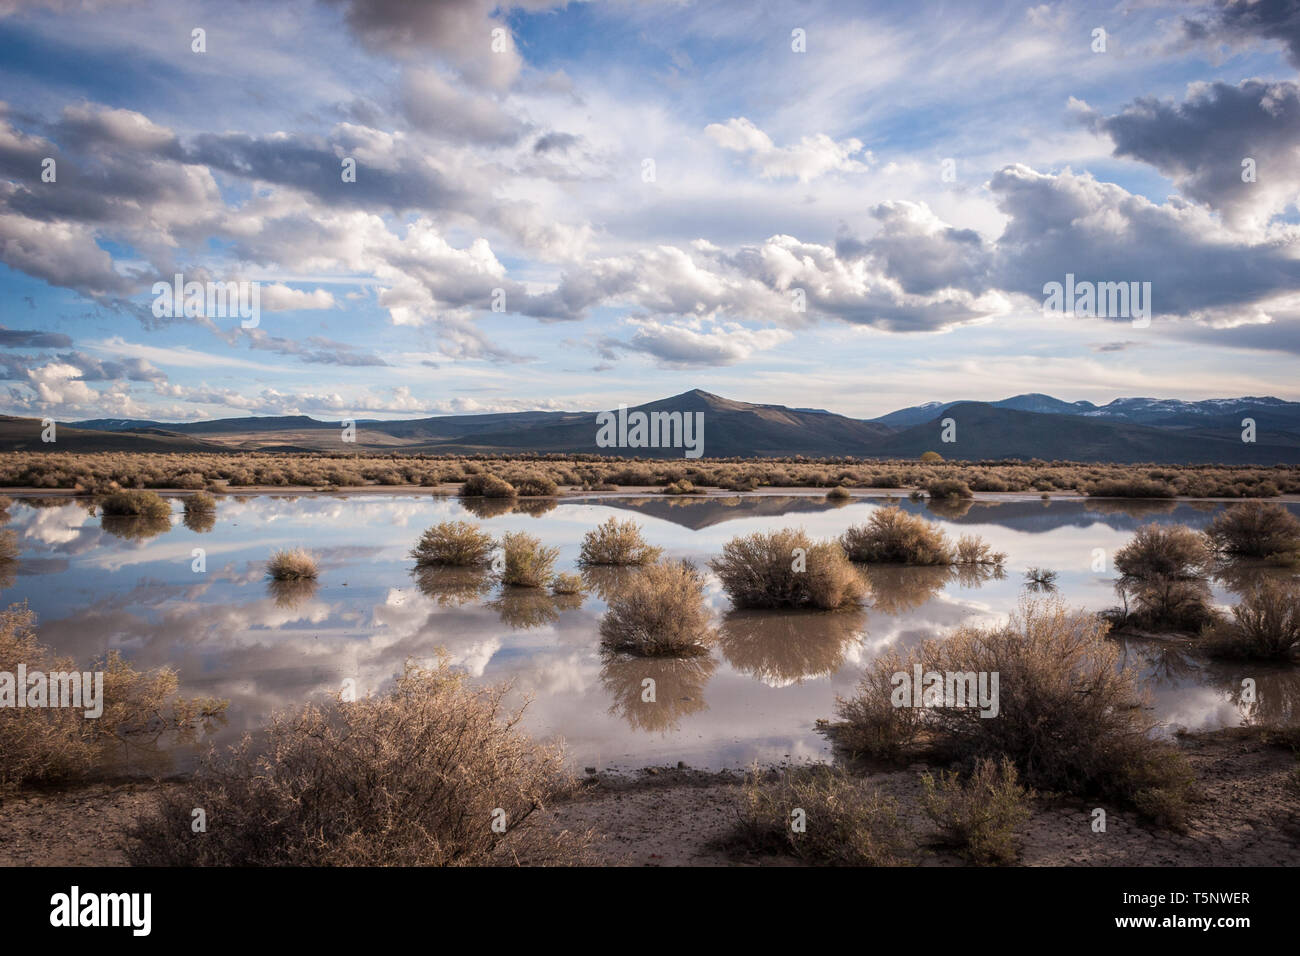 A dramatic landscape from the Great Basin in Oregon in spring during the golden hour. Stock Photo